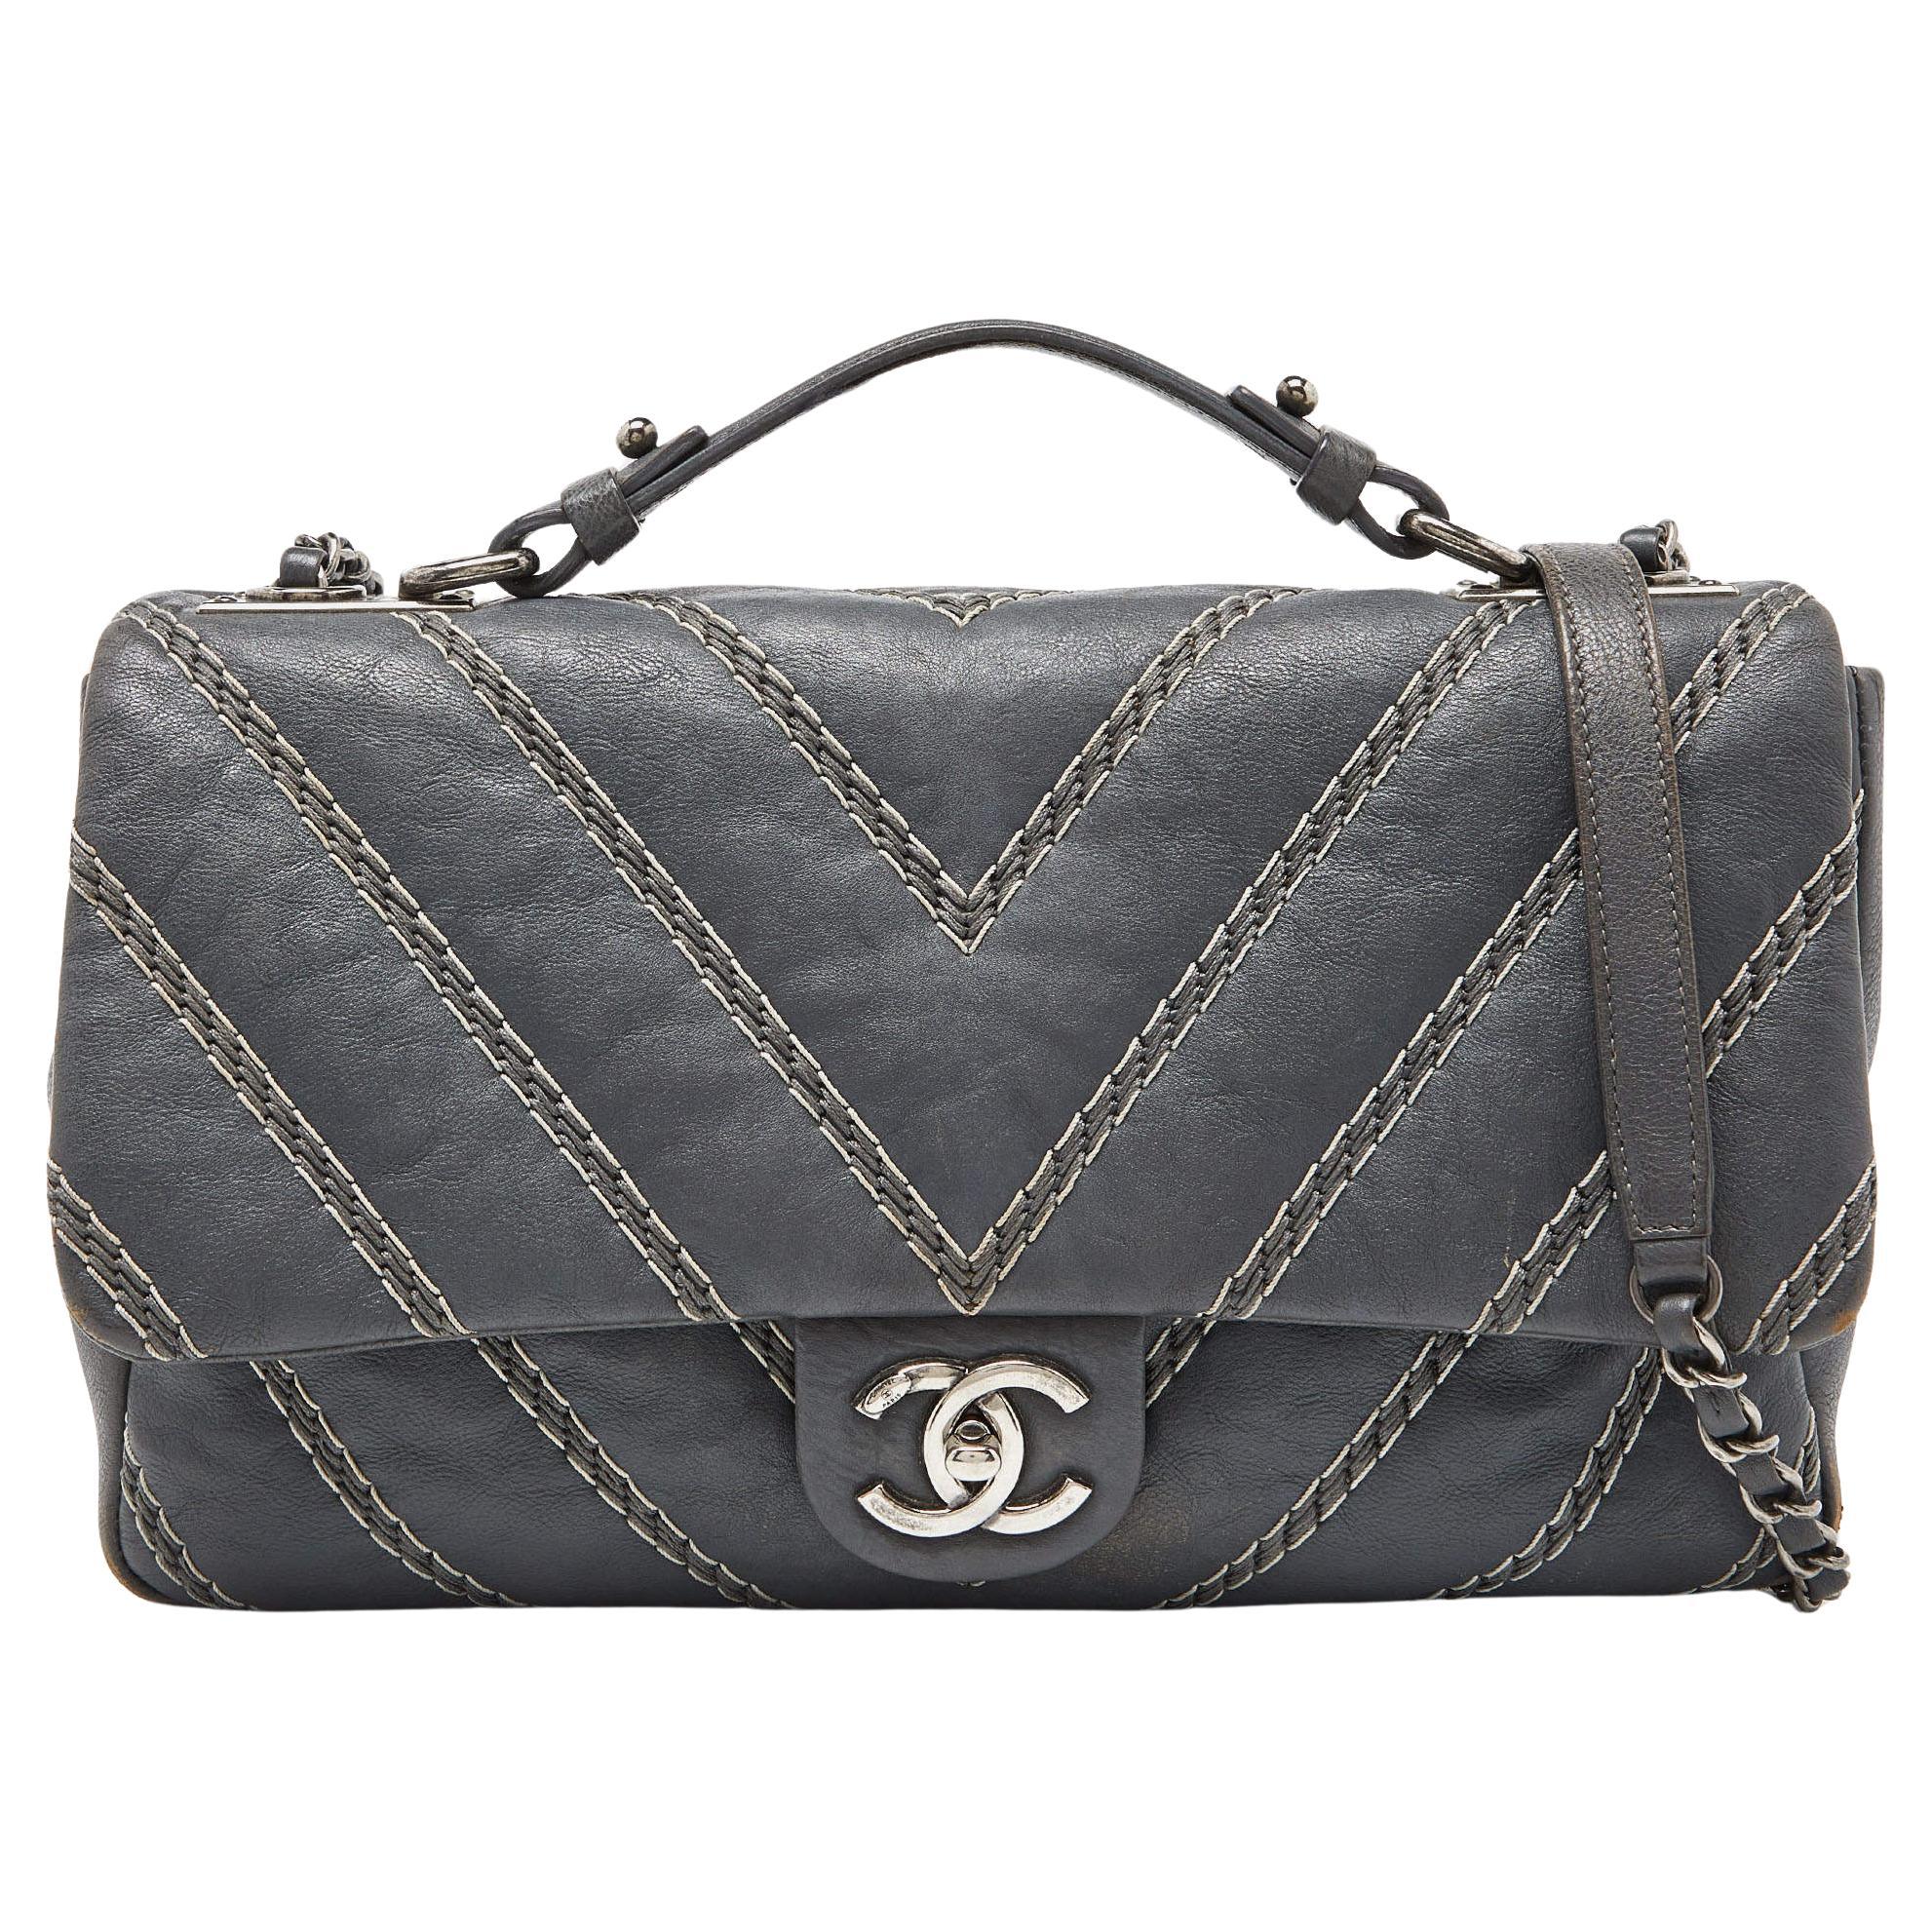 Chanel Grey Chevron Stitched Leather CC Top Handle Flap Bag